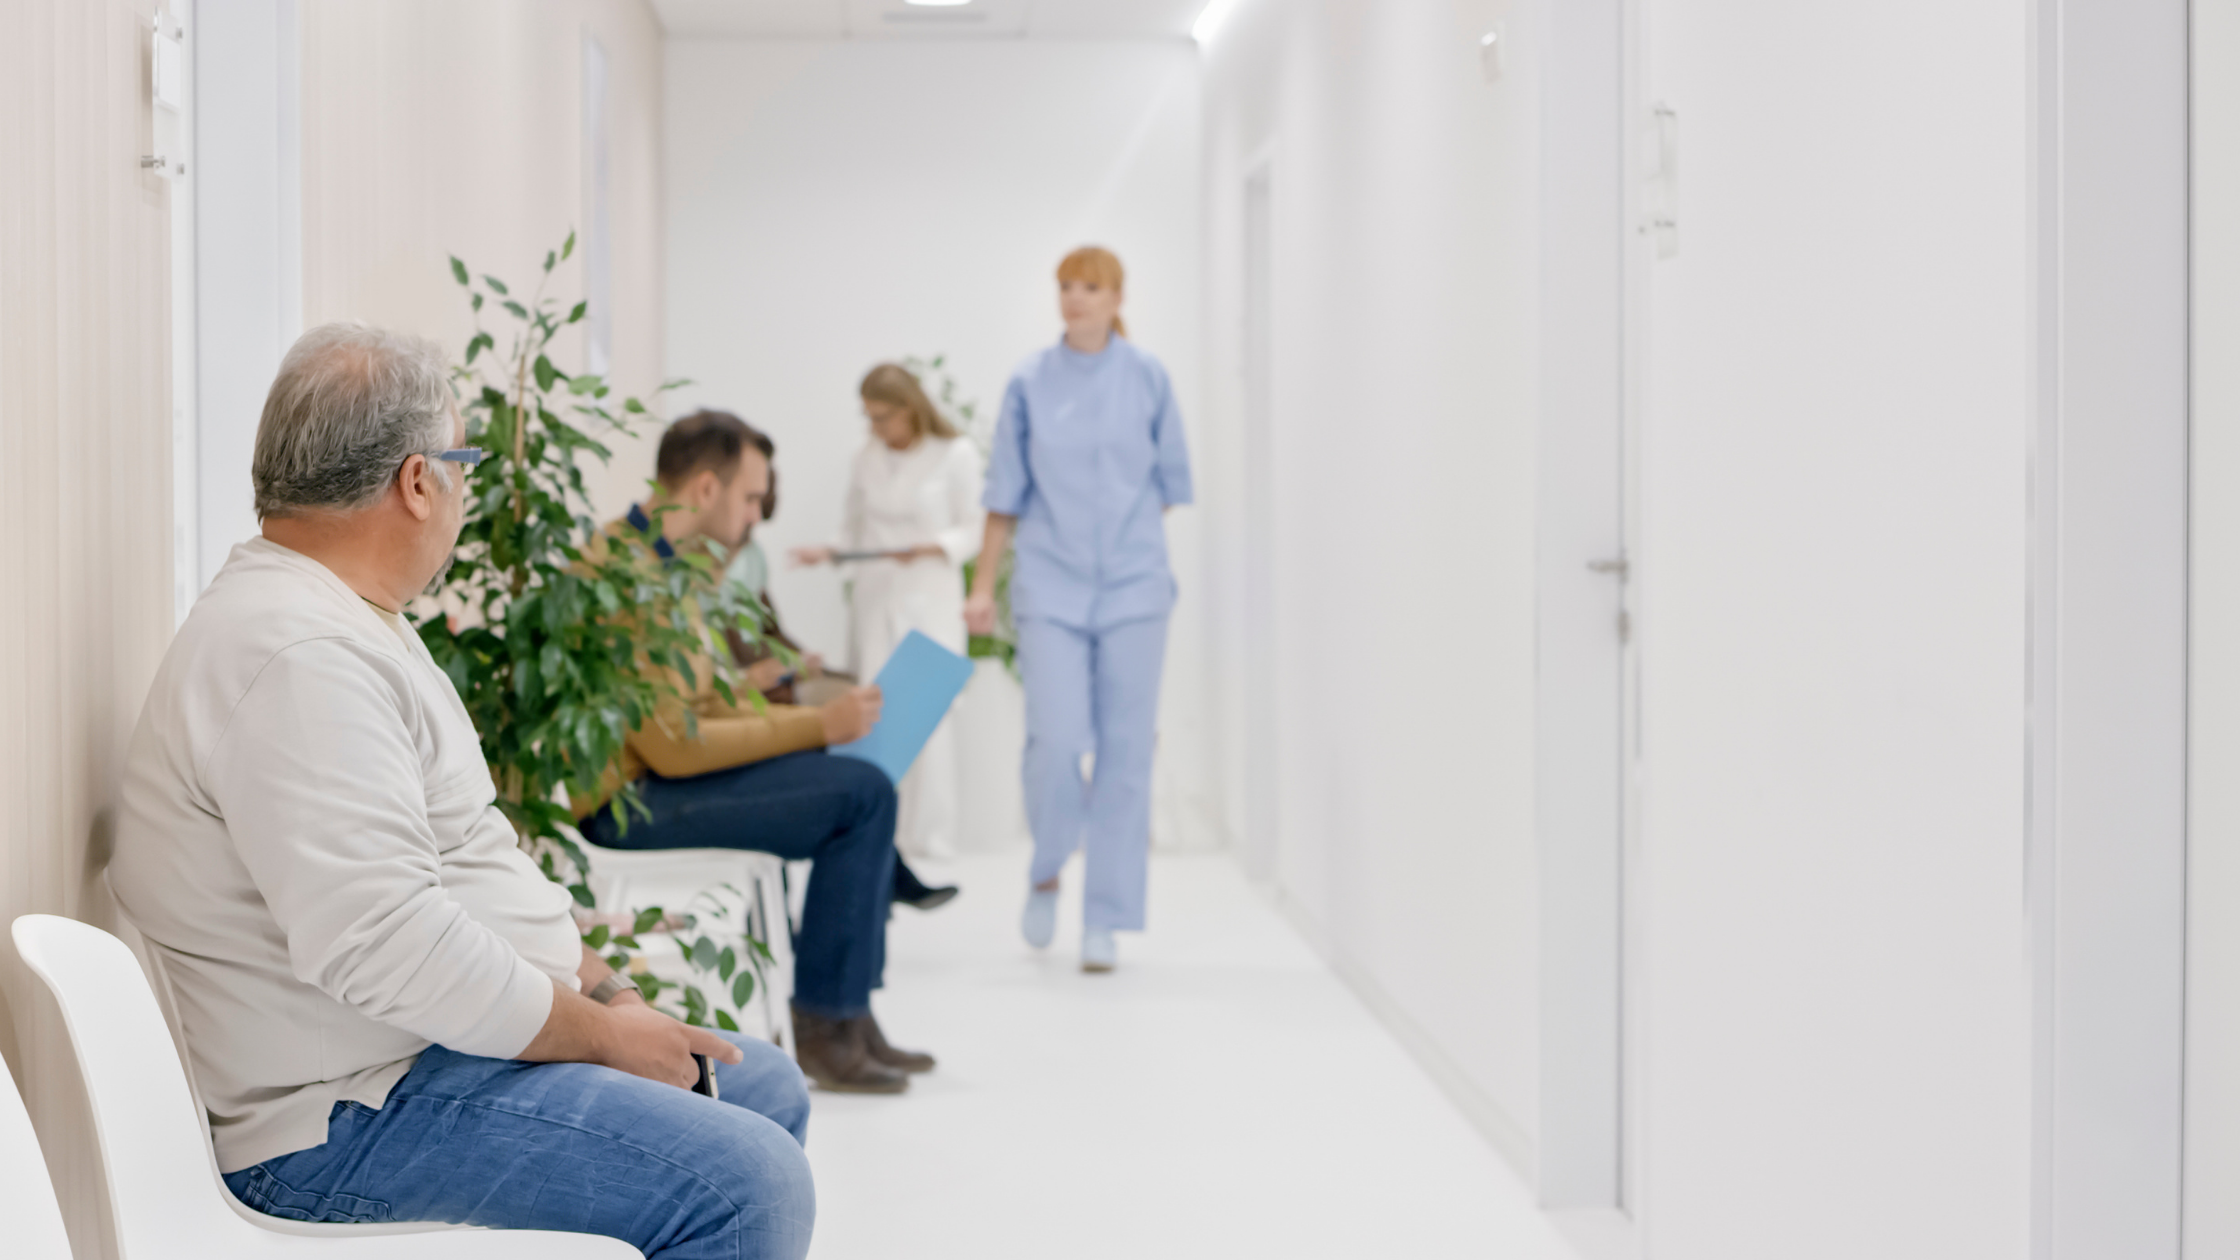 patient experience in waiting room